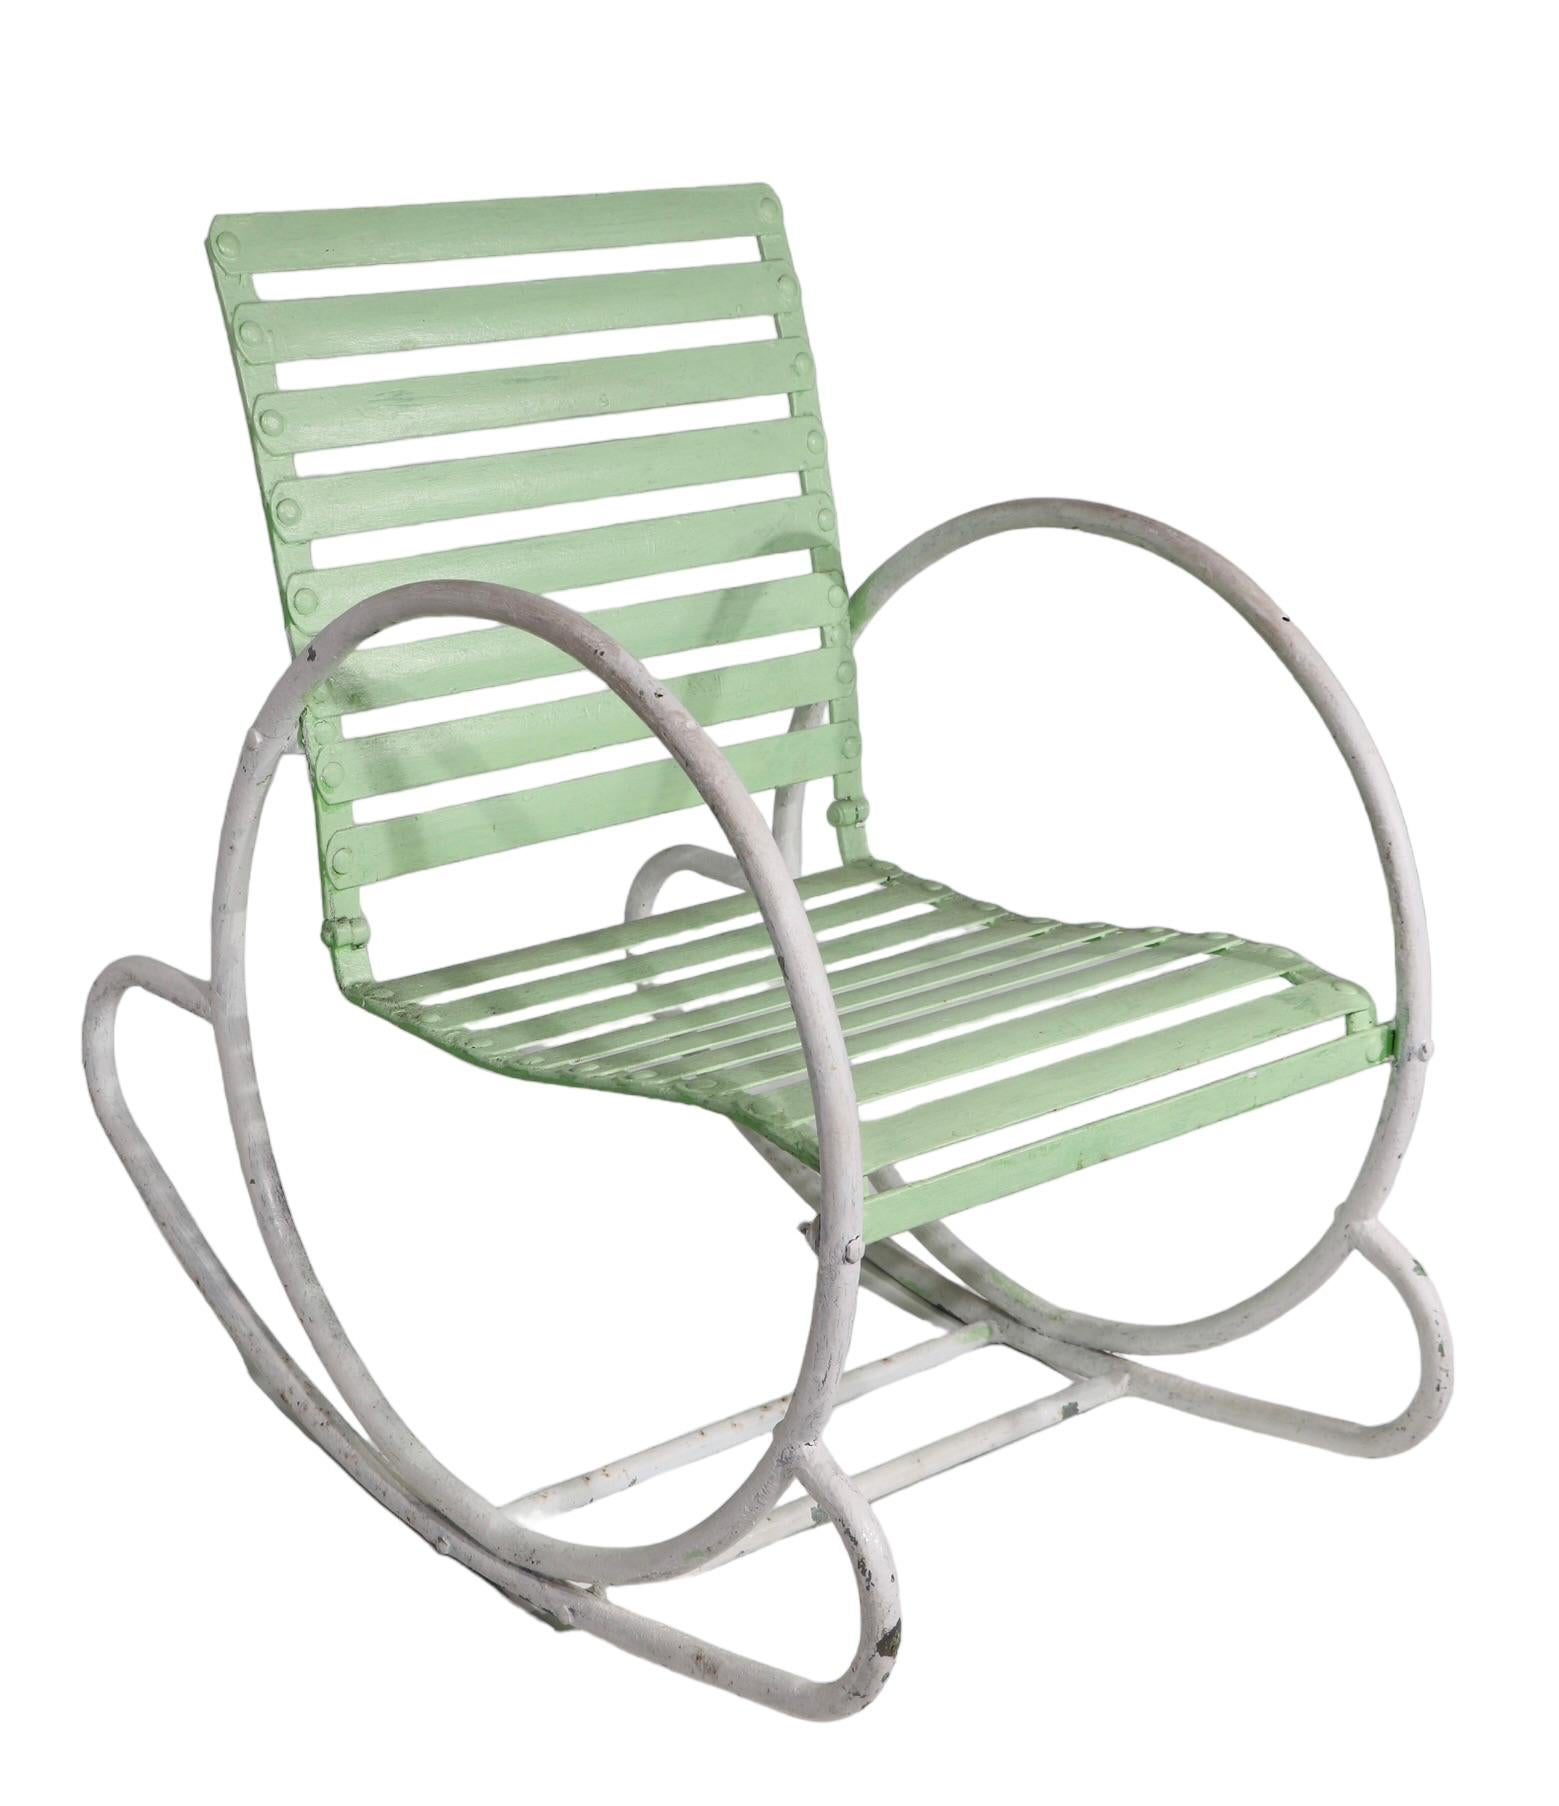 Art Deco Iron and Steel Garden Patio Poolside  Hoop Frame Rocking Chair c 1930's For Sale 8